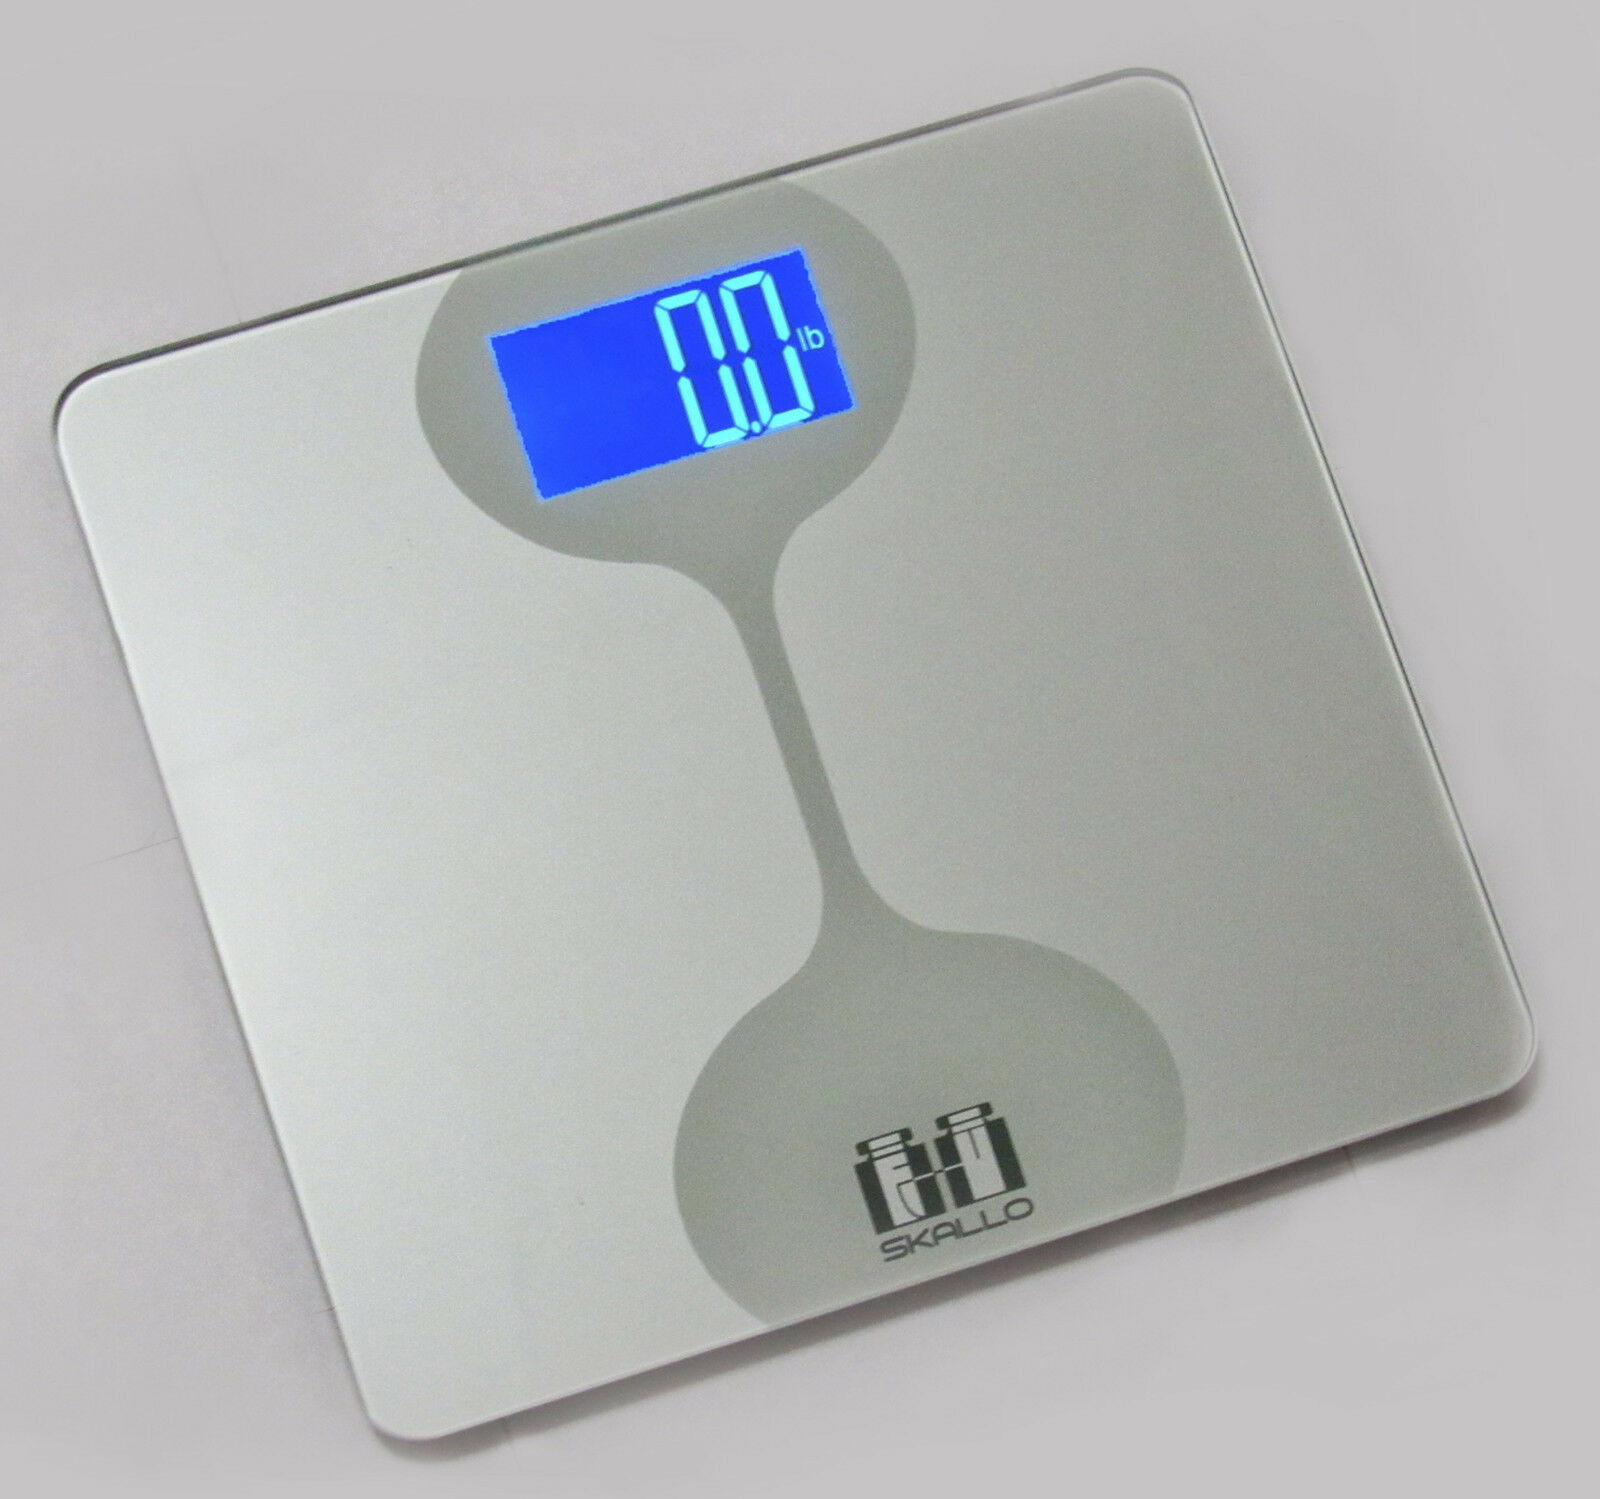 Skallo Sophie 400 Lbs Digital Glass Step On Fitness Bathroom Weight Body Scale